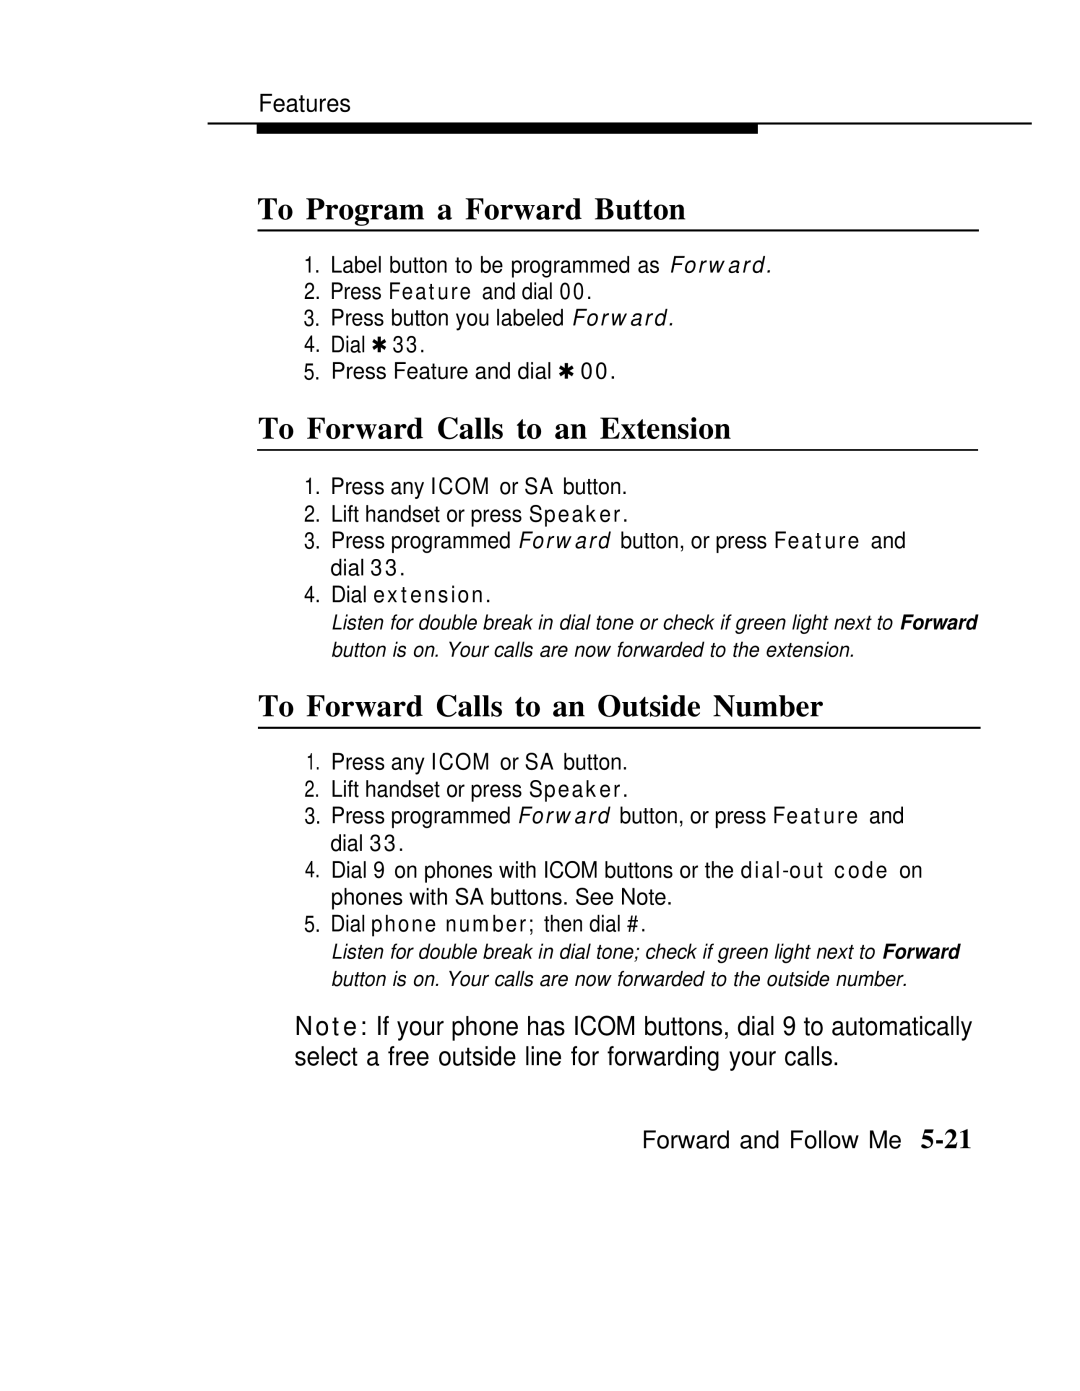 AT&T MLX-10 manual To Program a Forward Button, To Forward Calls to an Extension, To Forward Calls to an Outside Number 